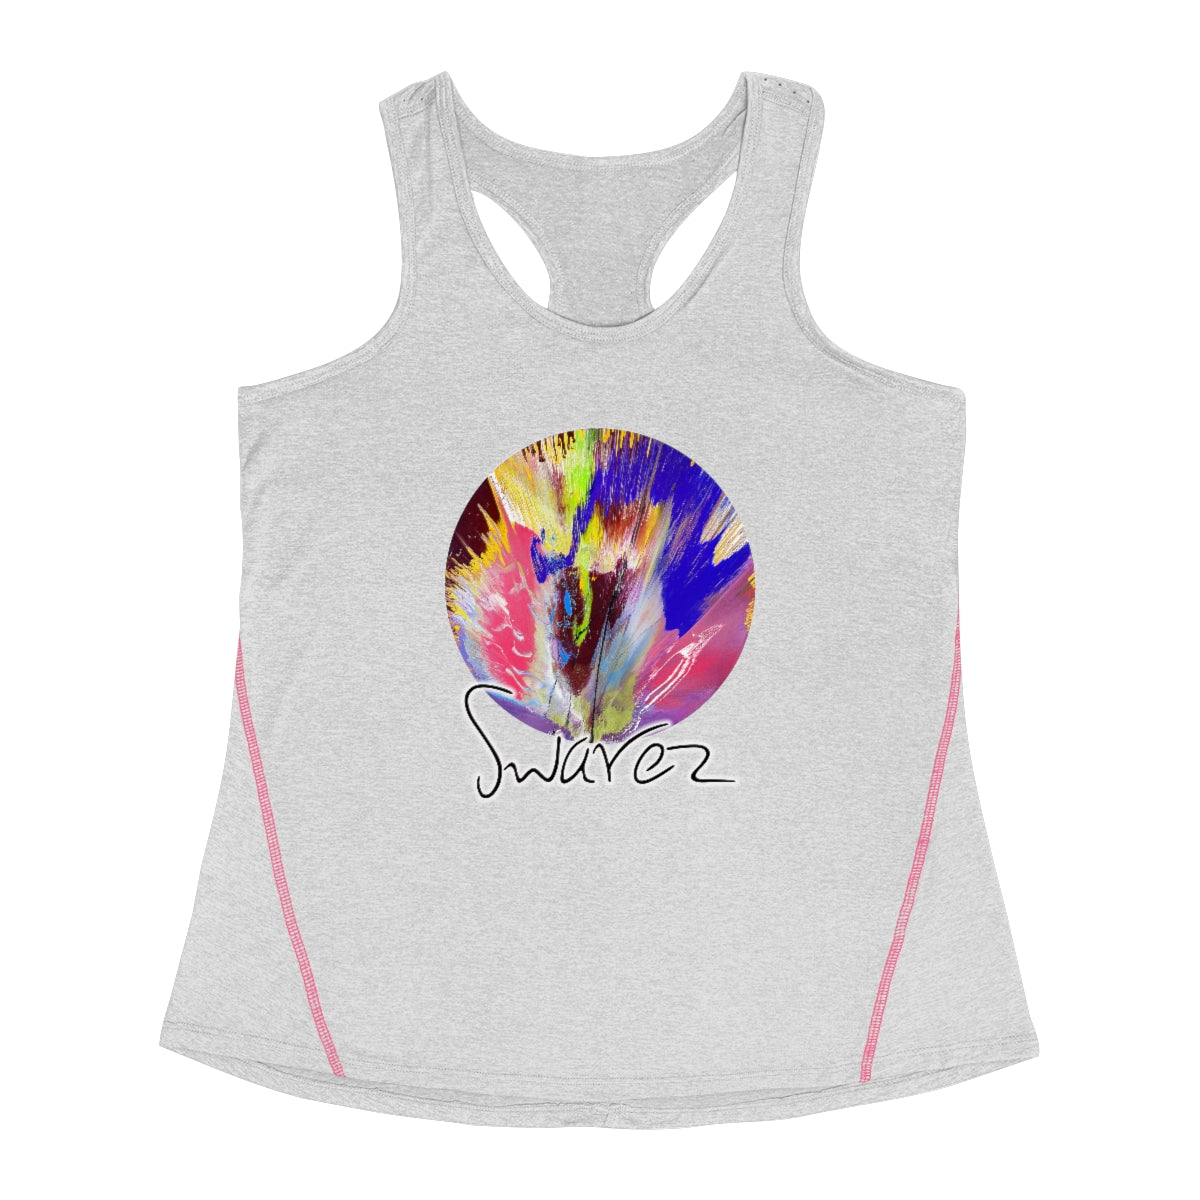 Women's Racerback Sports Top - Spin art and logo